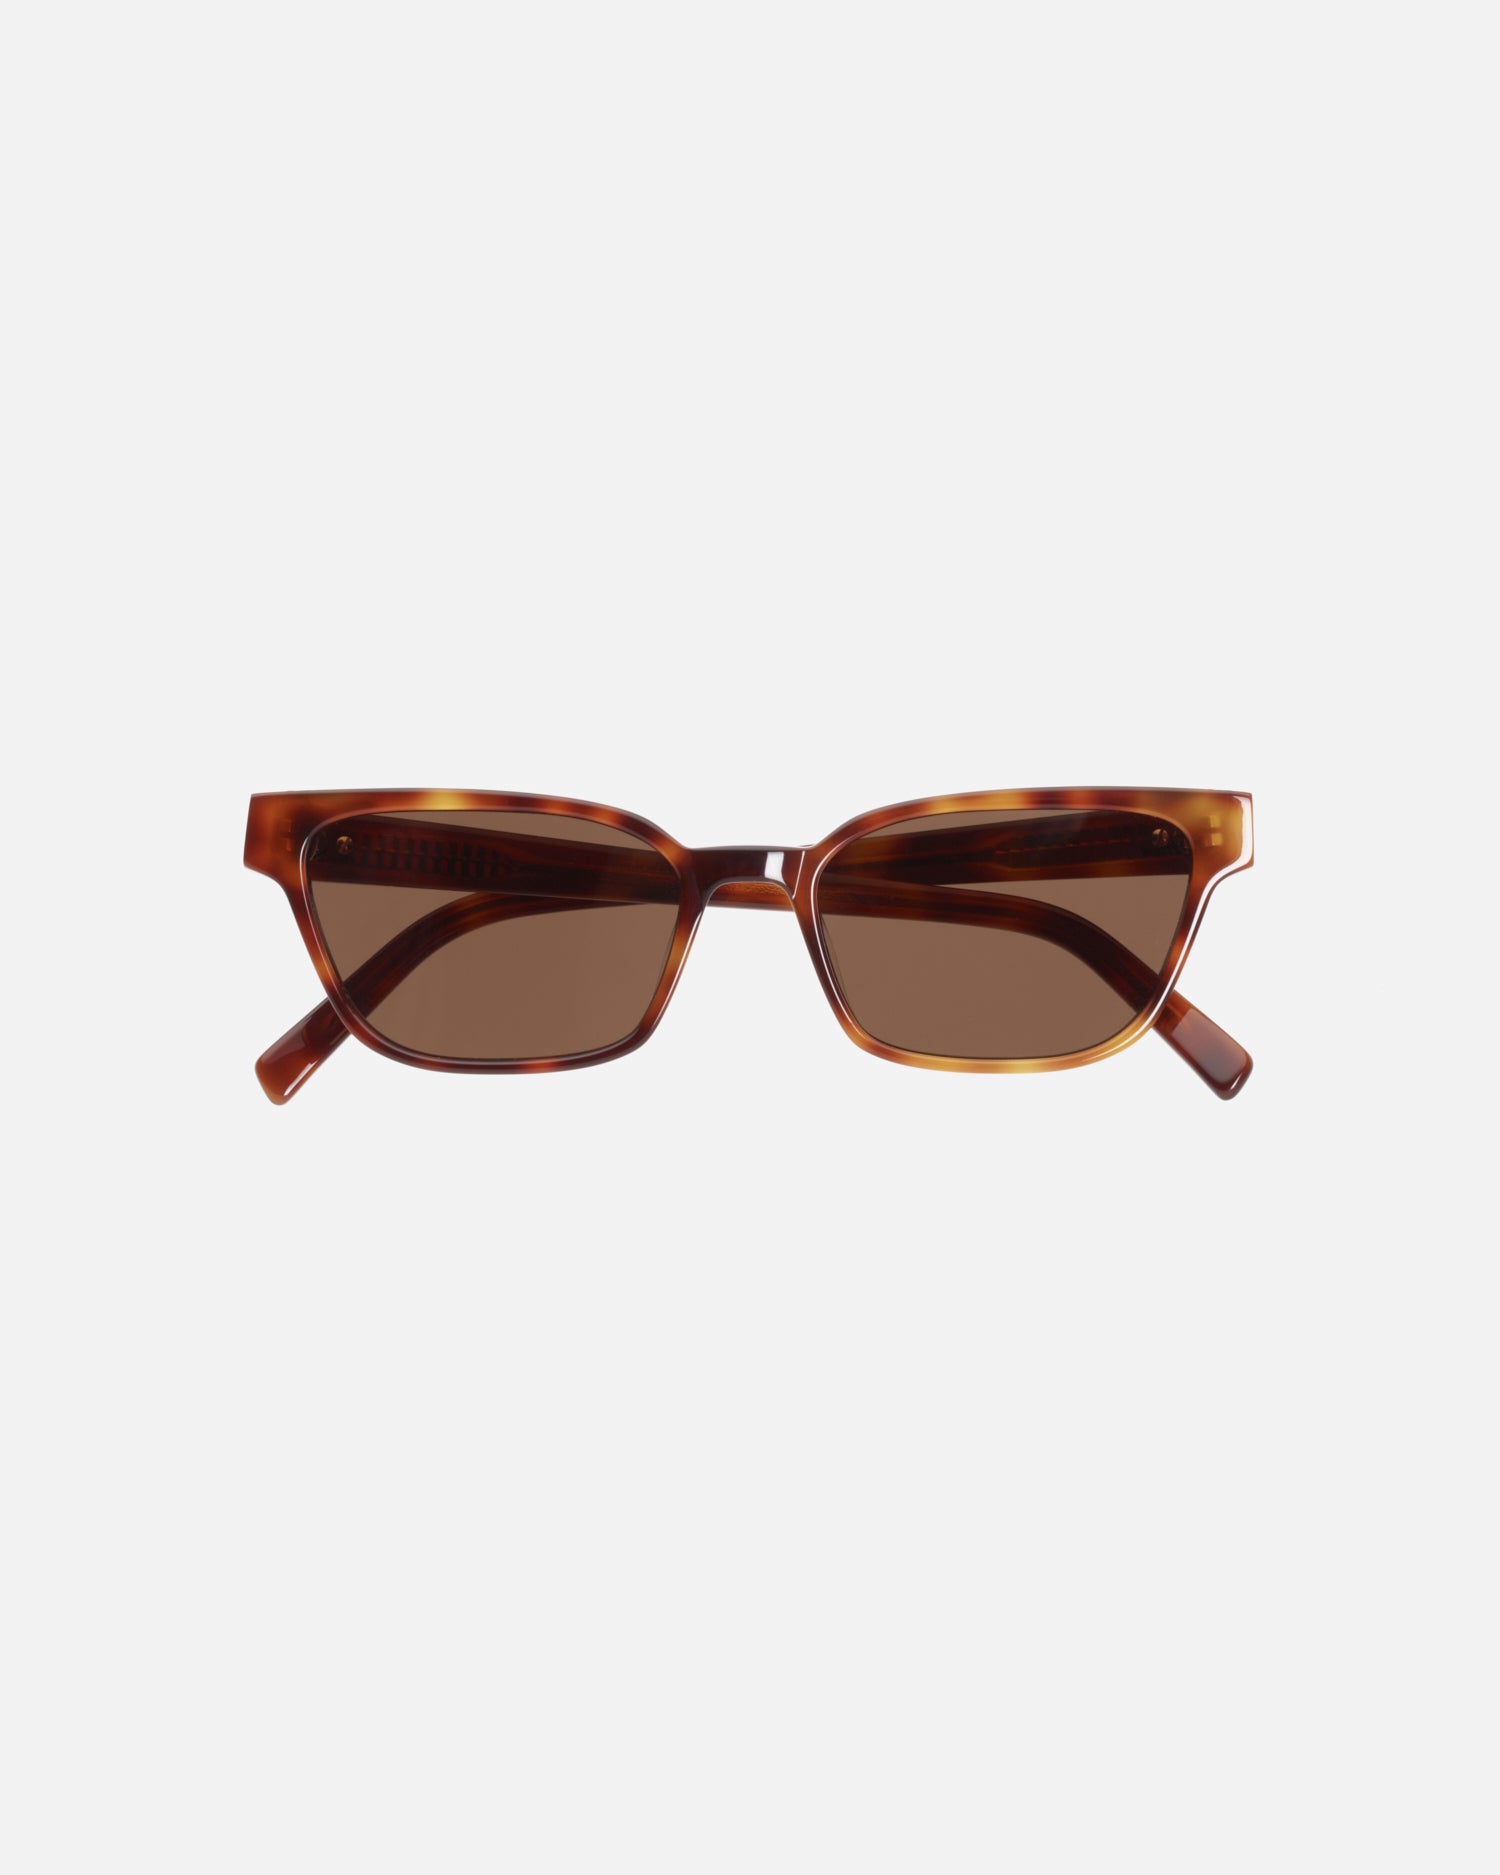 The Visionary luxe sunglasses by Velvet Canyon in Havana Foncé